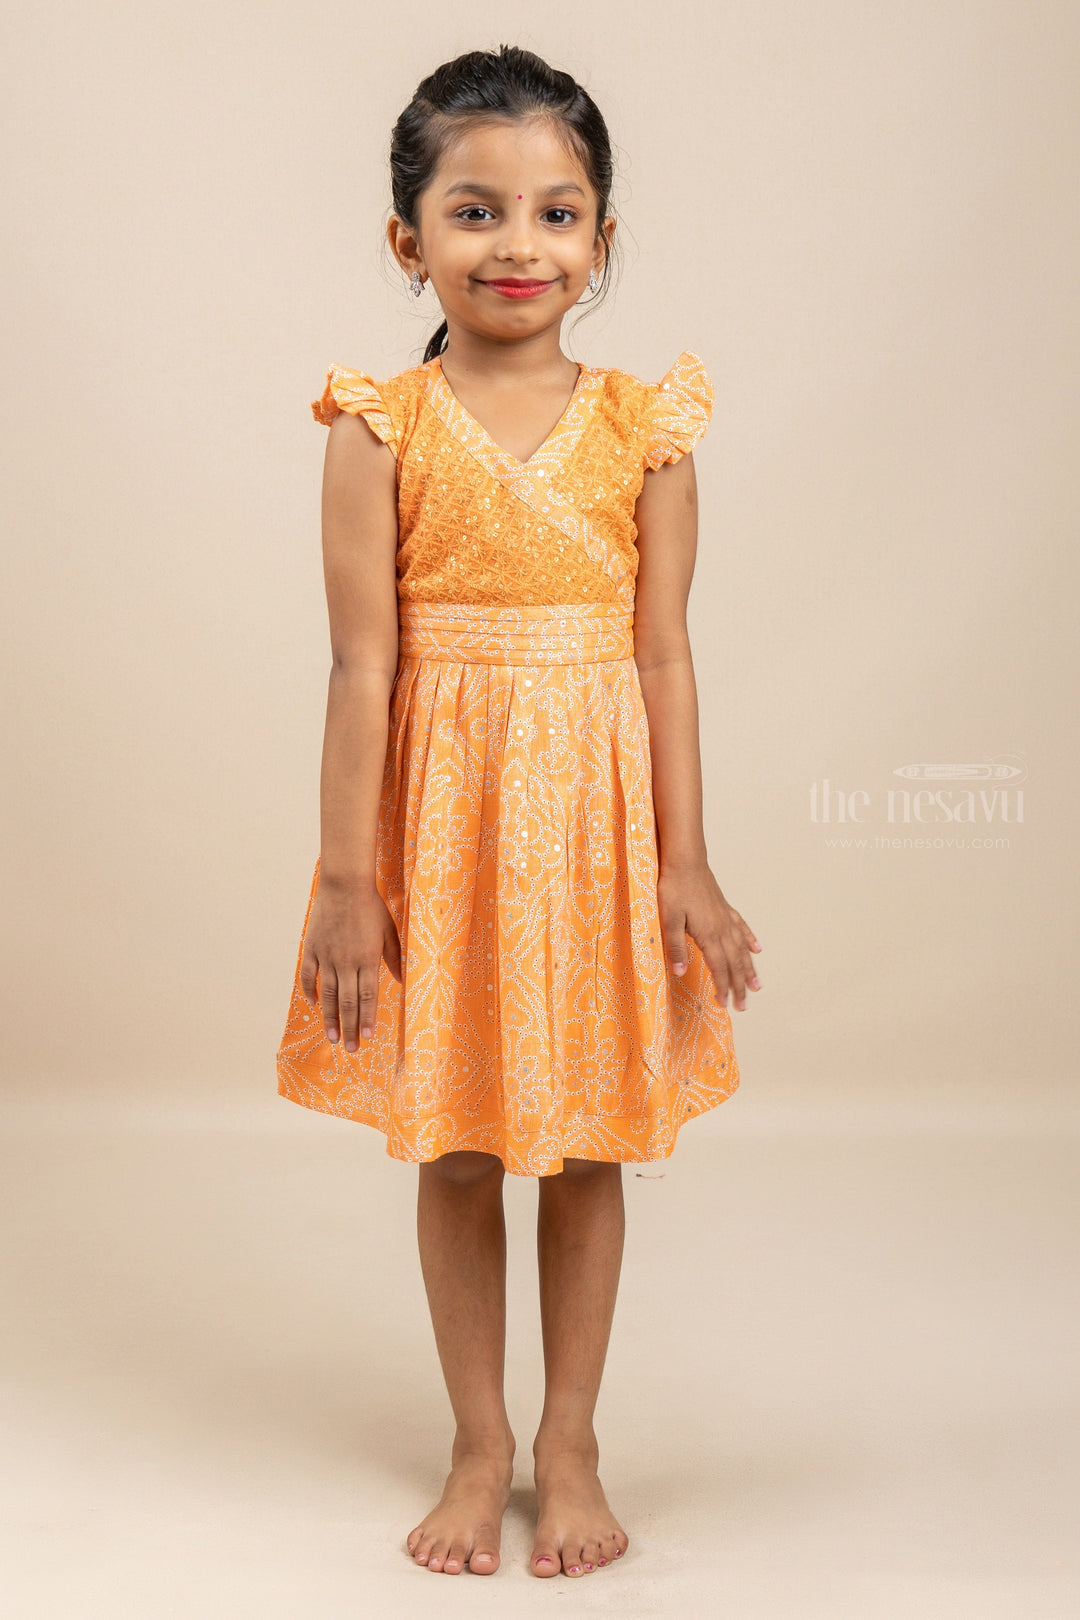 The Nesavu Girls Fancy Frock Mustard Is A Must - Fancy Frock With Bandhani Activated Designs Nesavu 12 (3M) / Orange / Cotton GFC966C-12 Latest Girls Cotton Frock Design| Cotton Frock| The Nesavu